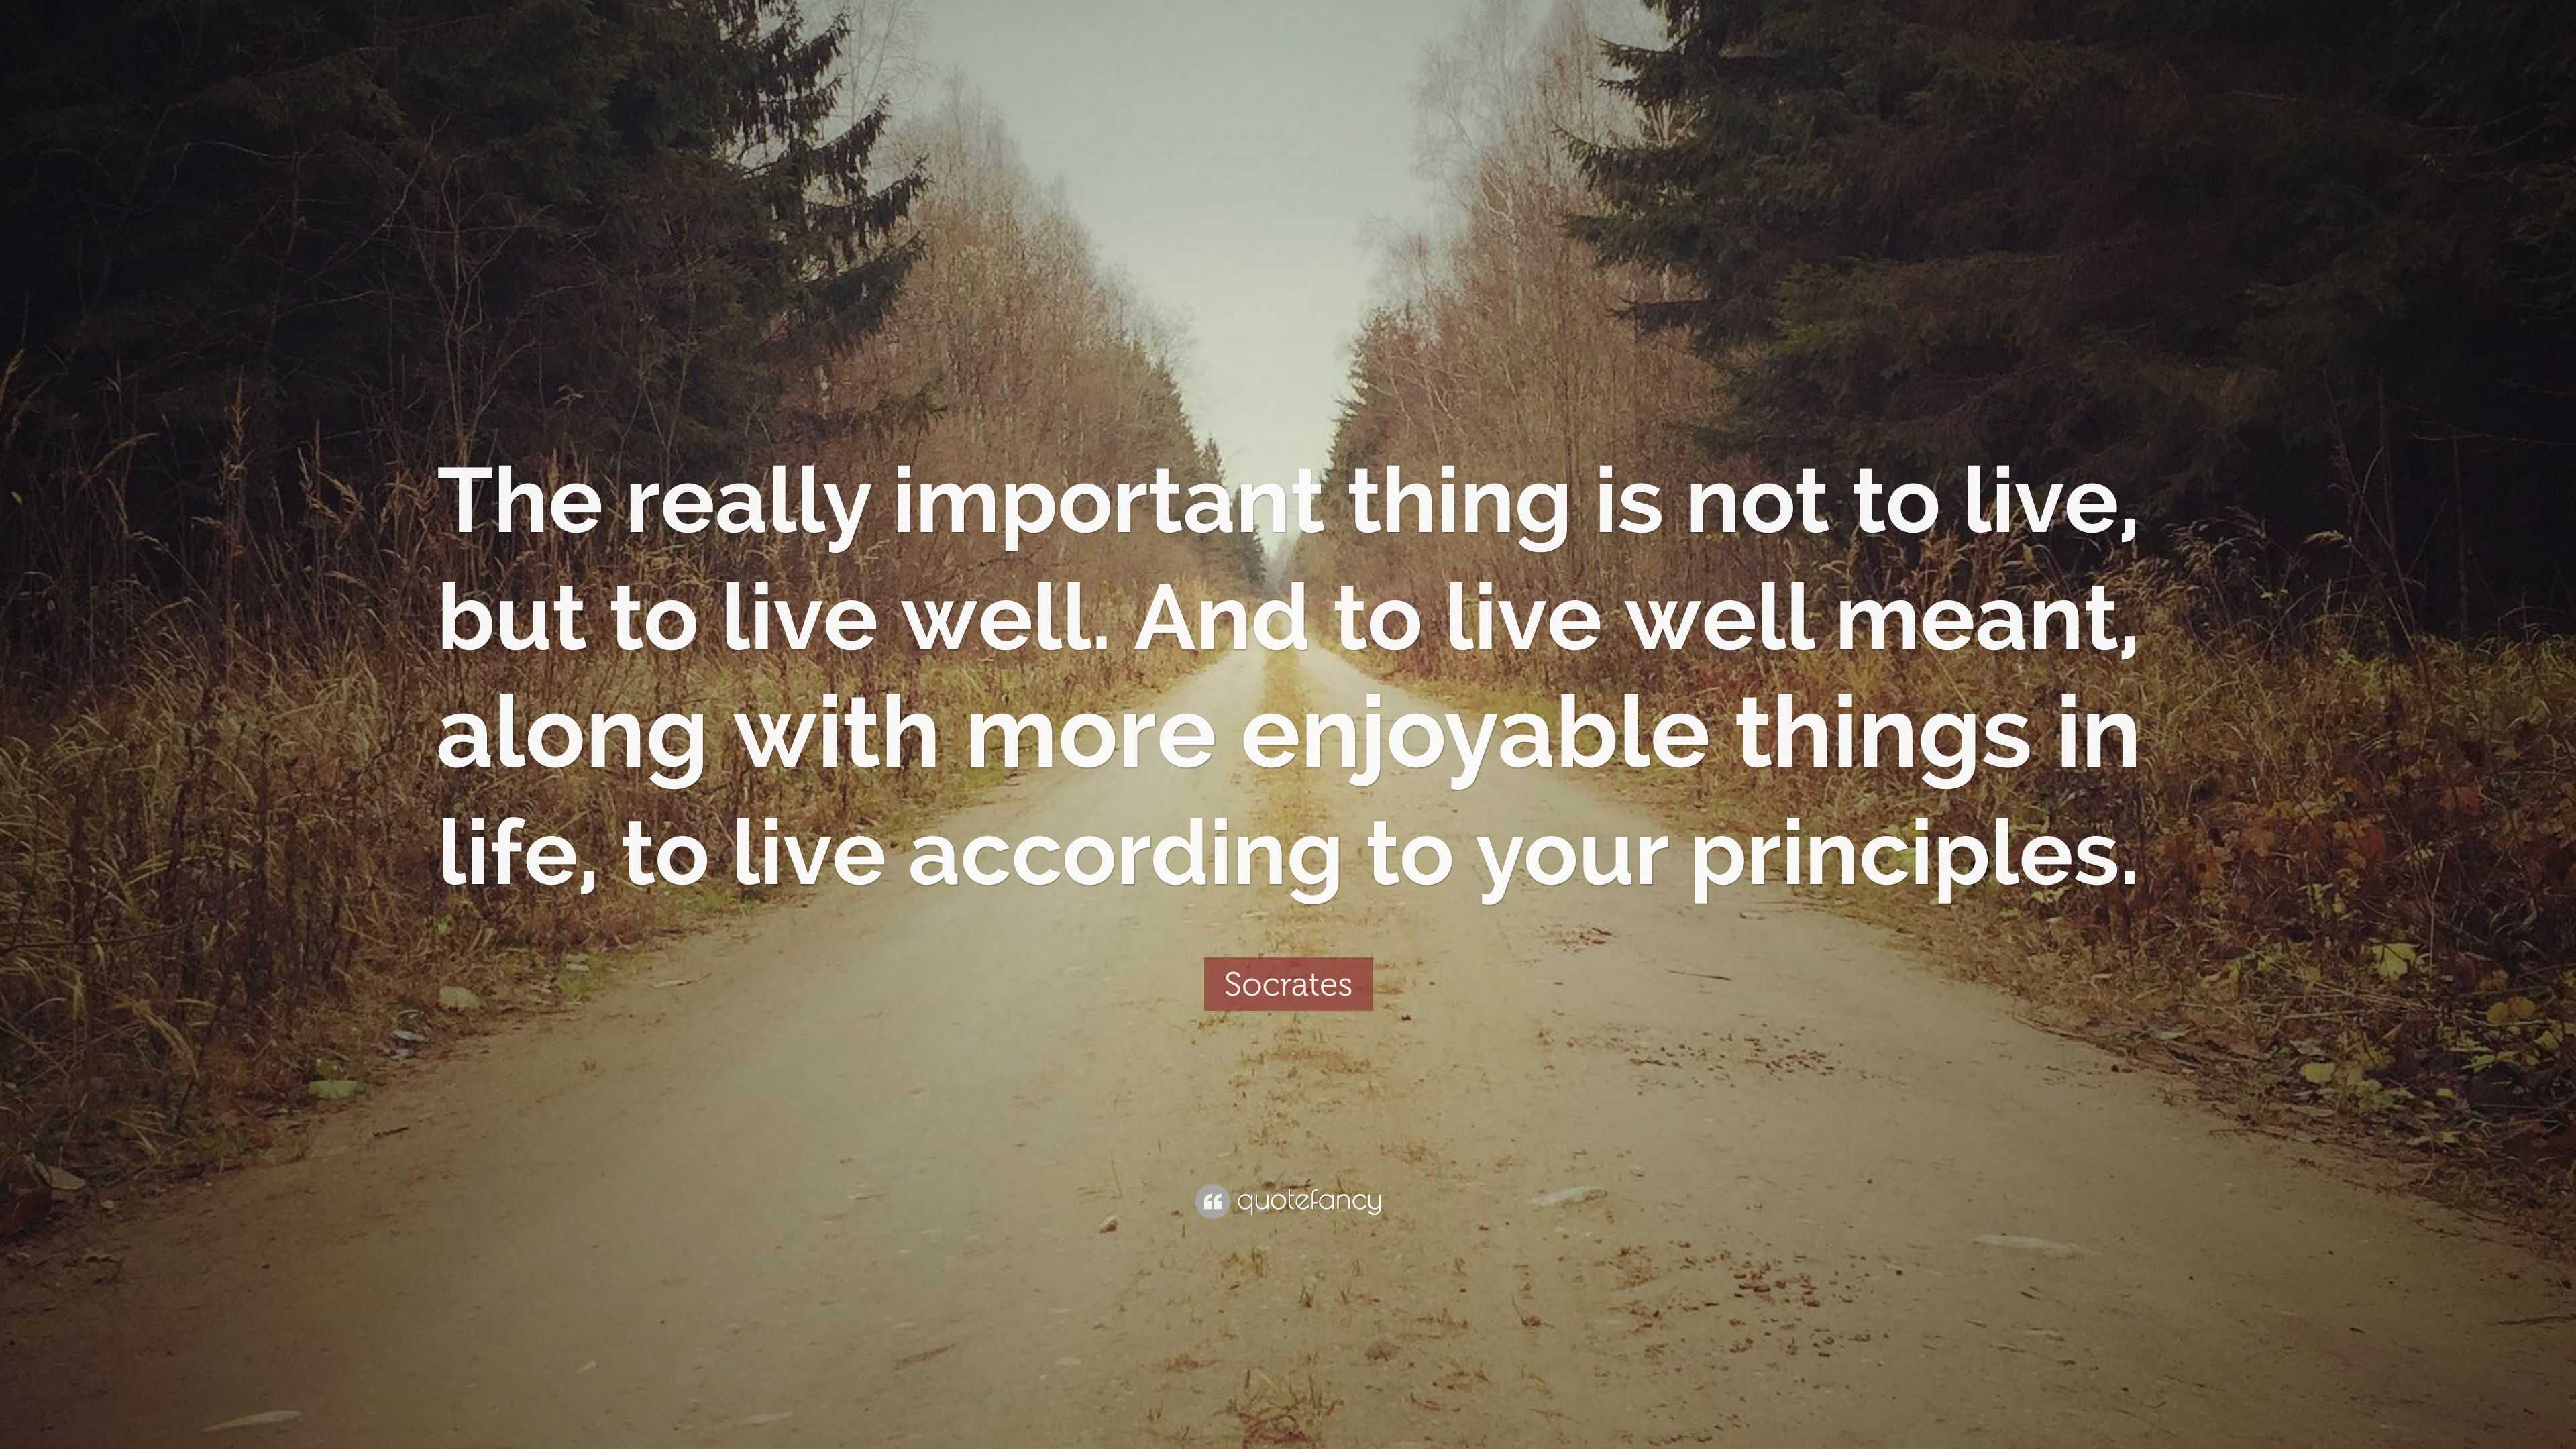 Socrates Quote: “The really important thing is not to live, but to live ...